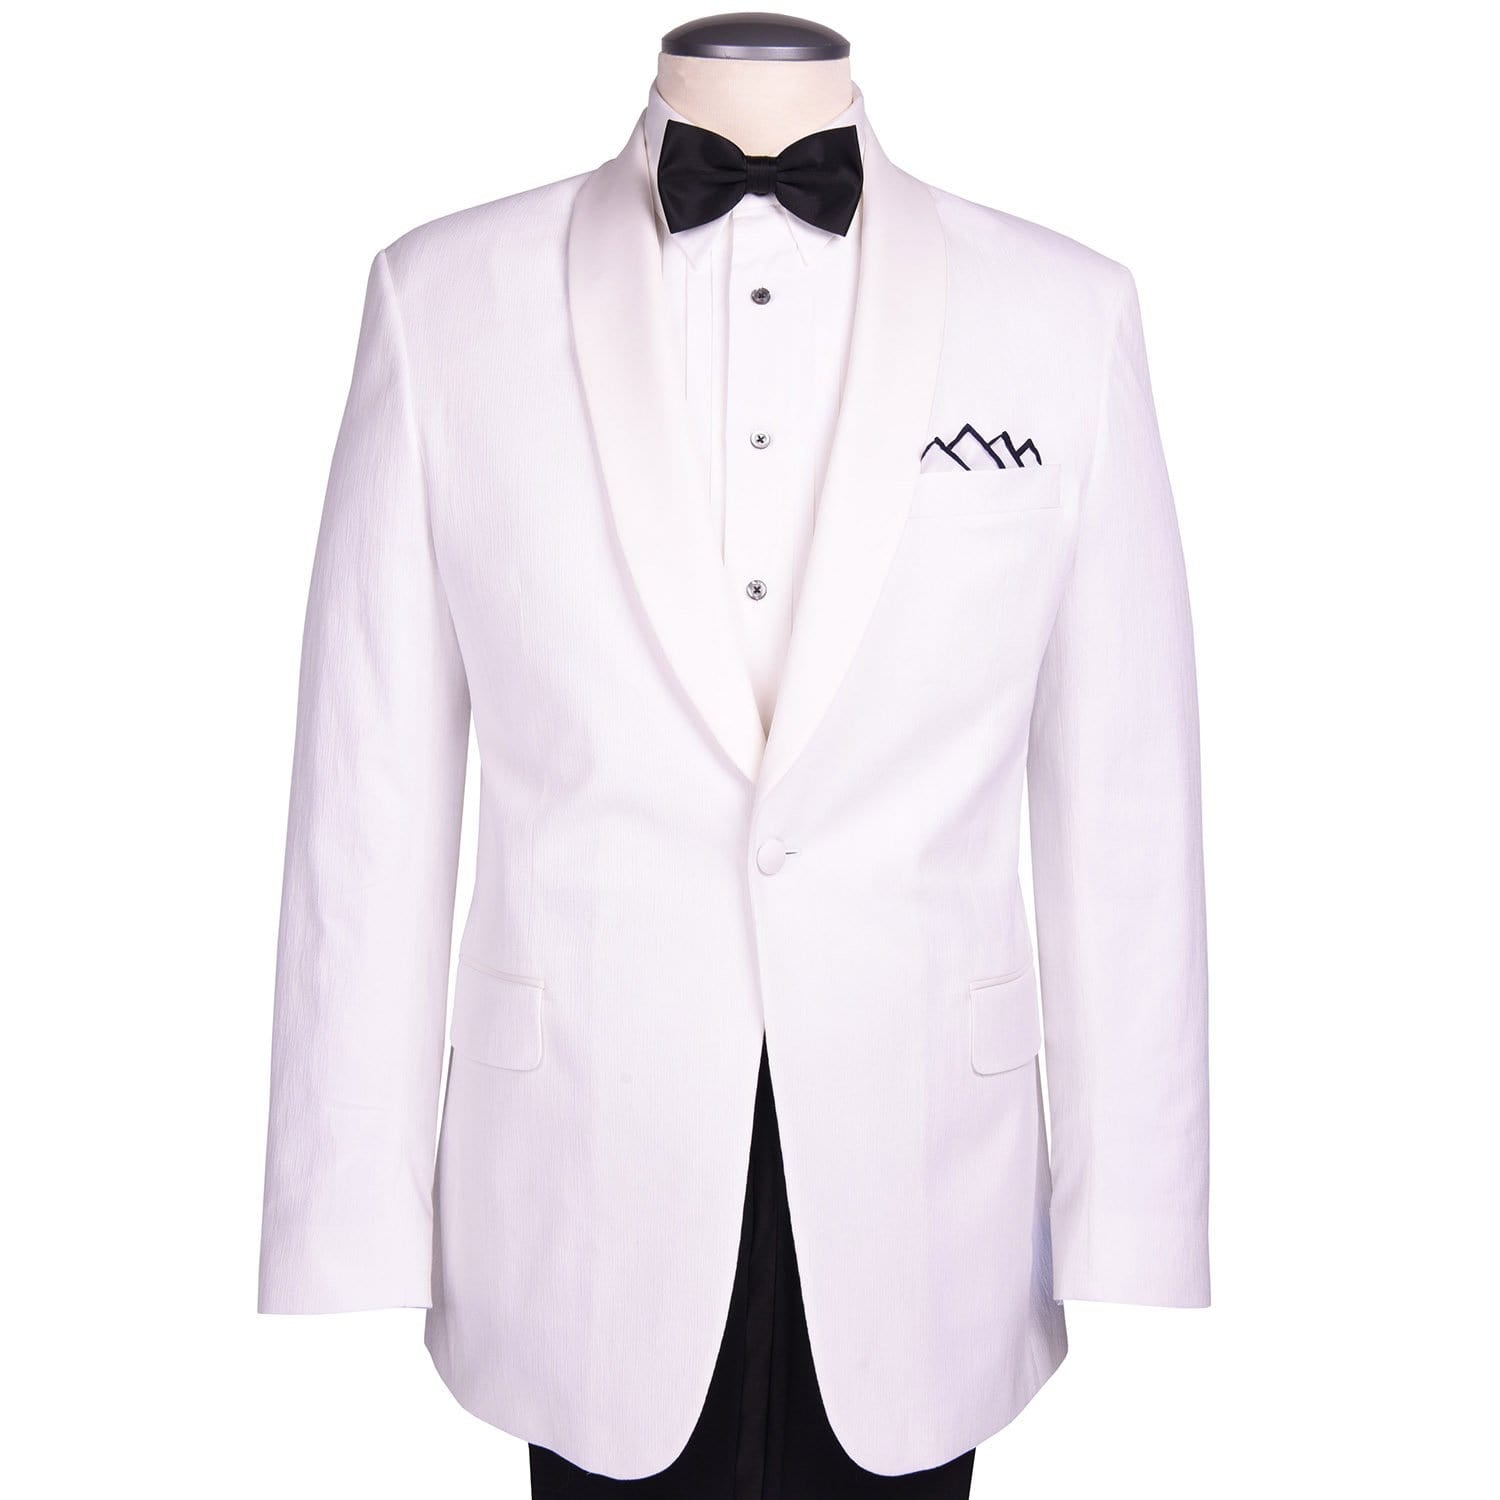 White Textured Cotton "Royale" Dinner Jacket - Haspel Clothing